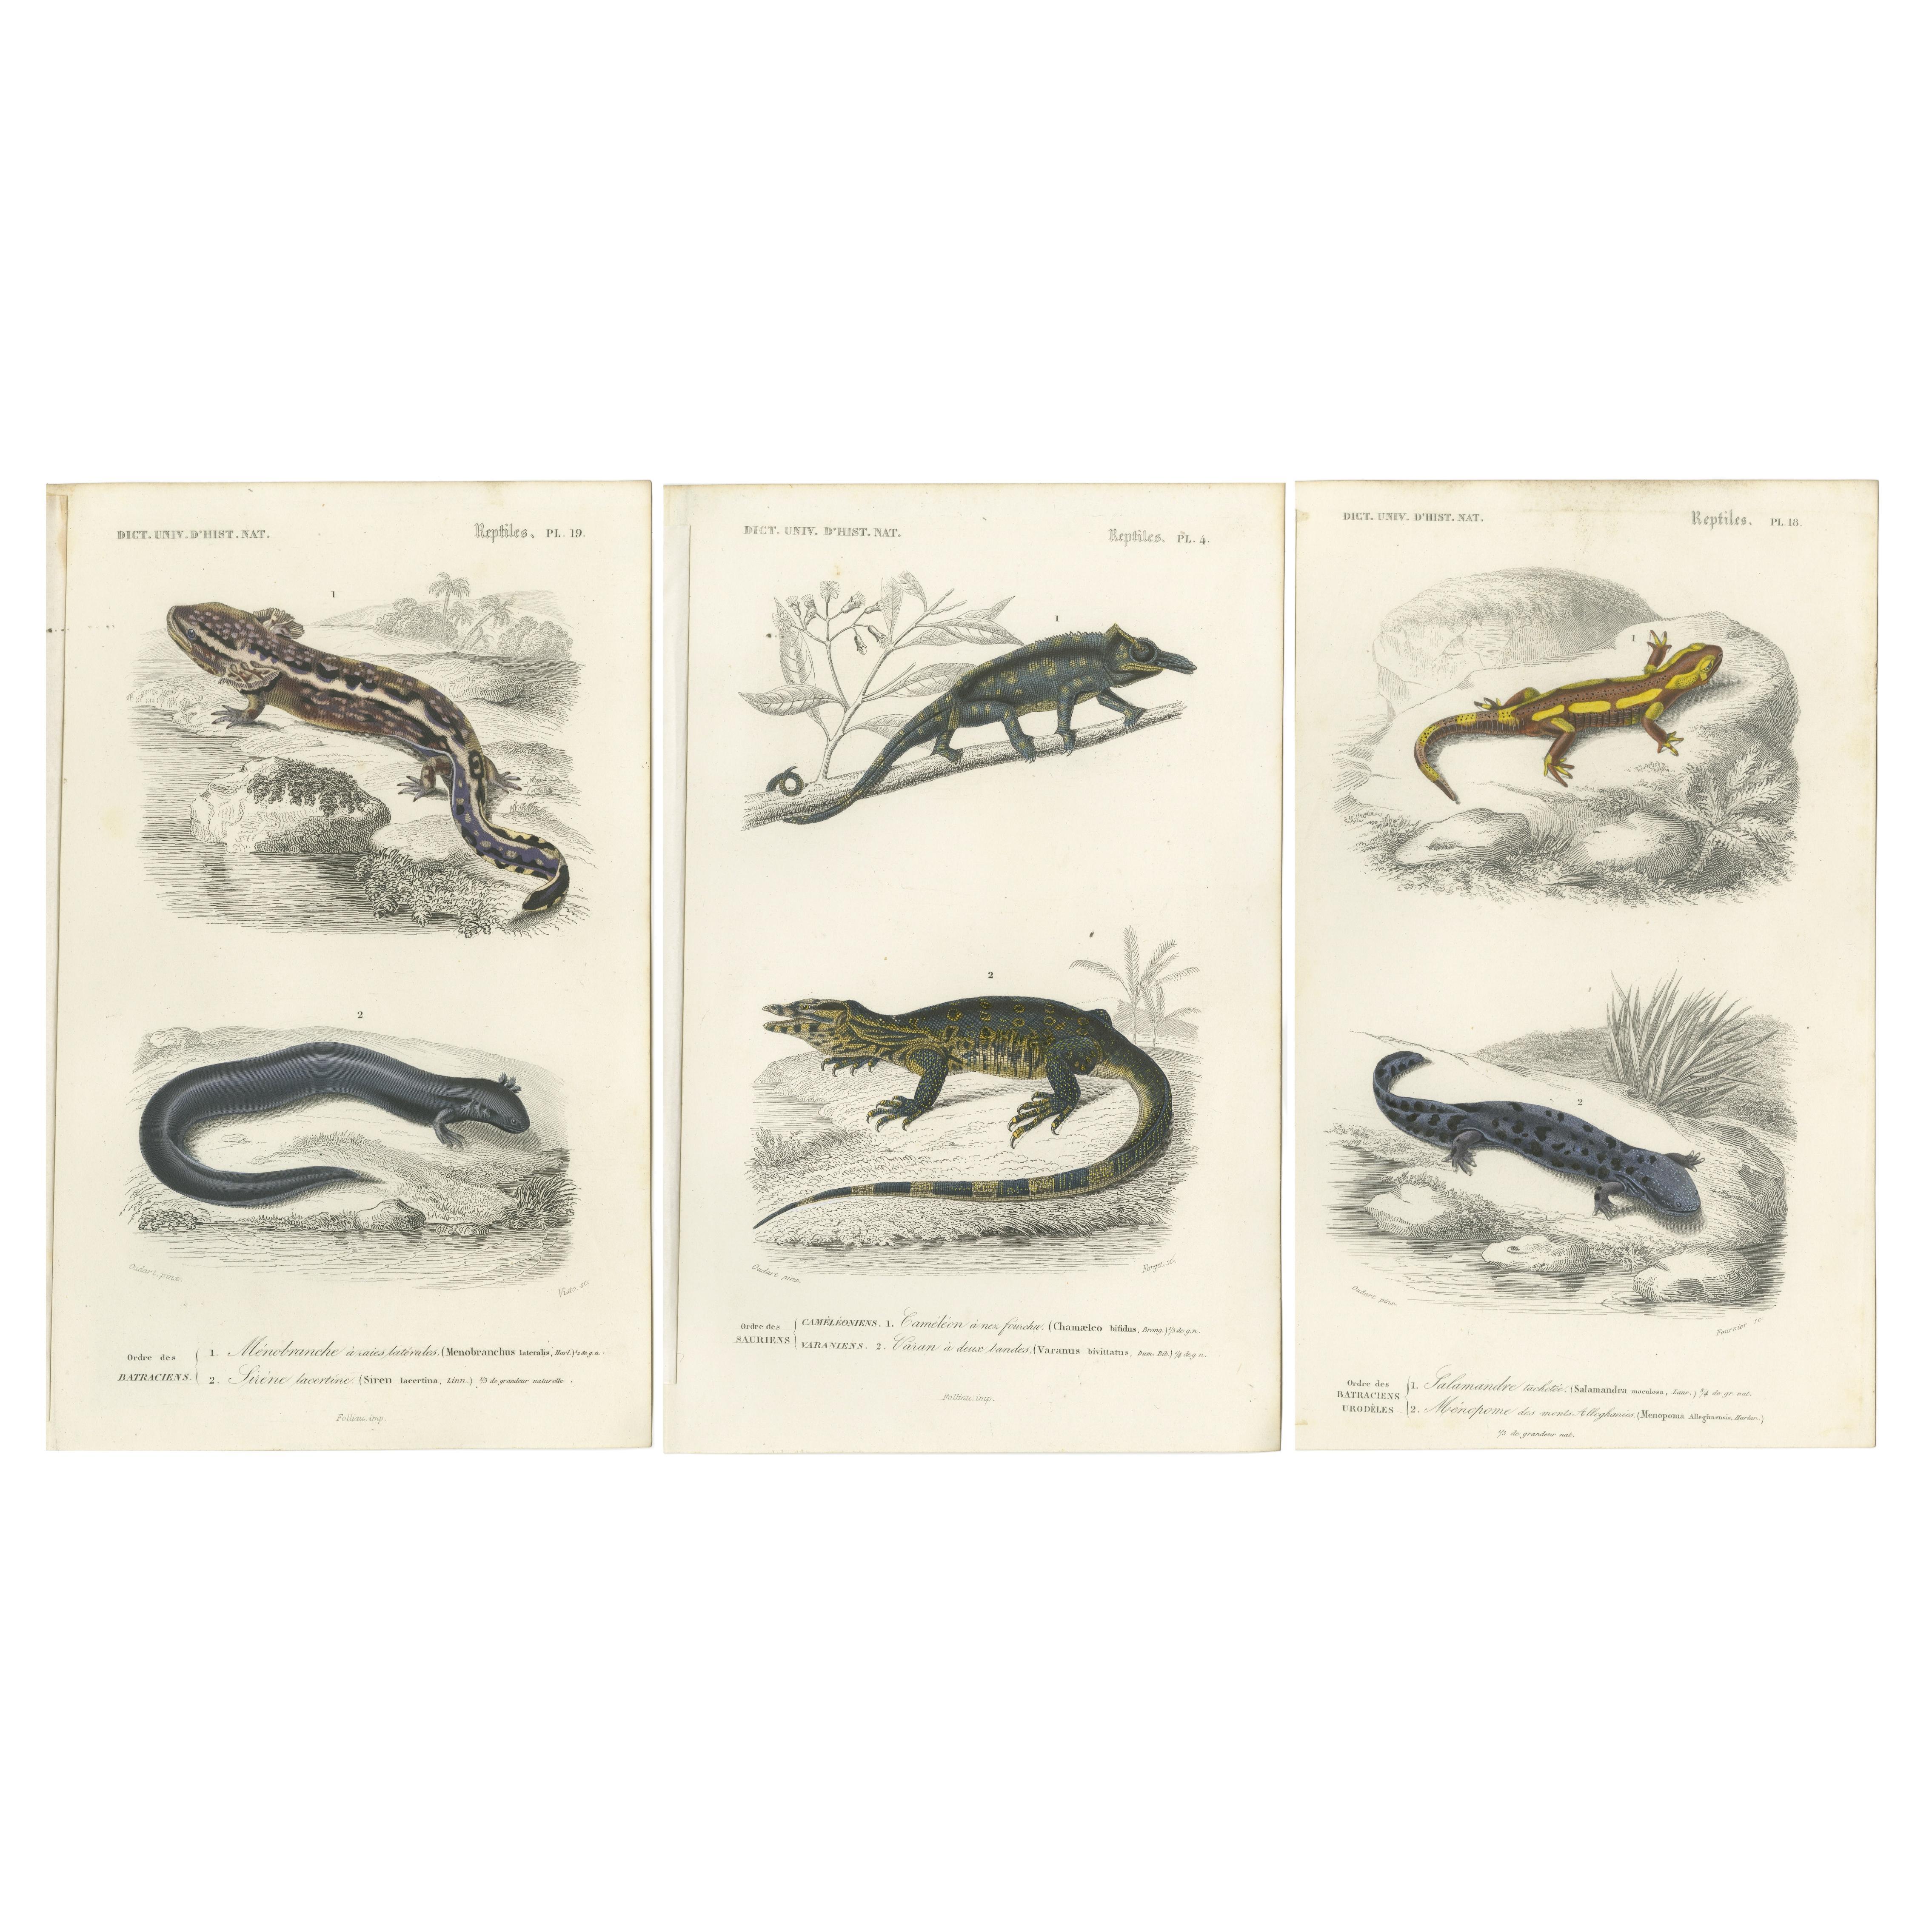 Set of 3 Antique Prints of a Chameleon and Other Reptiles